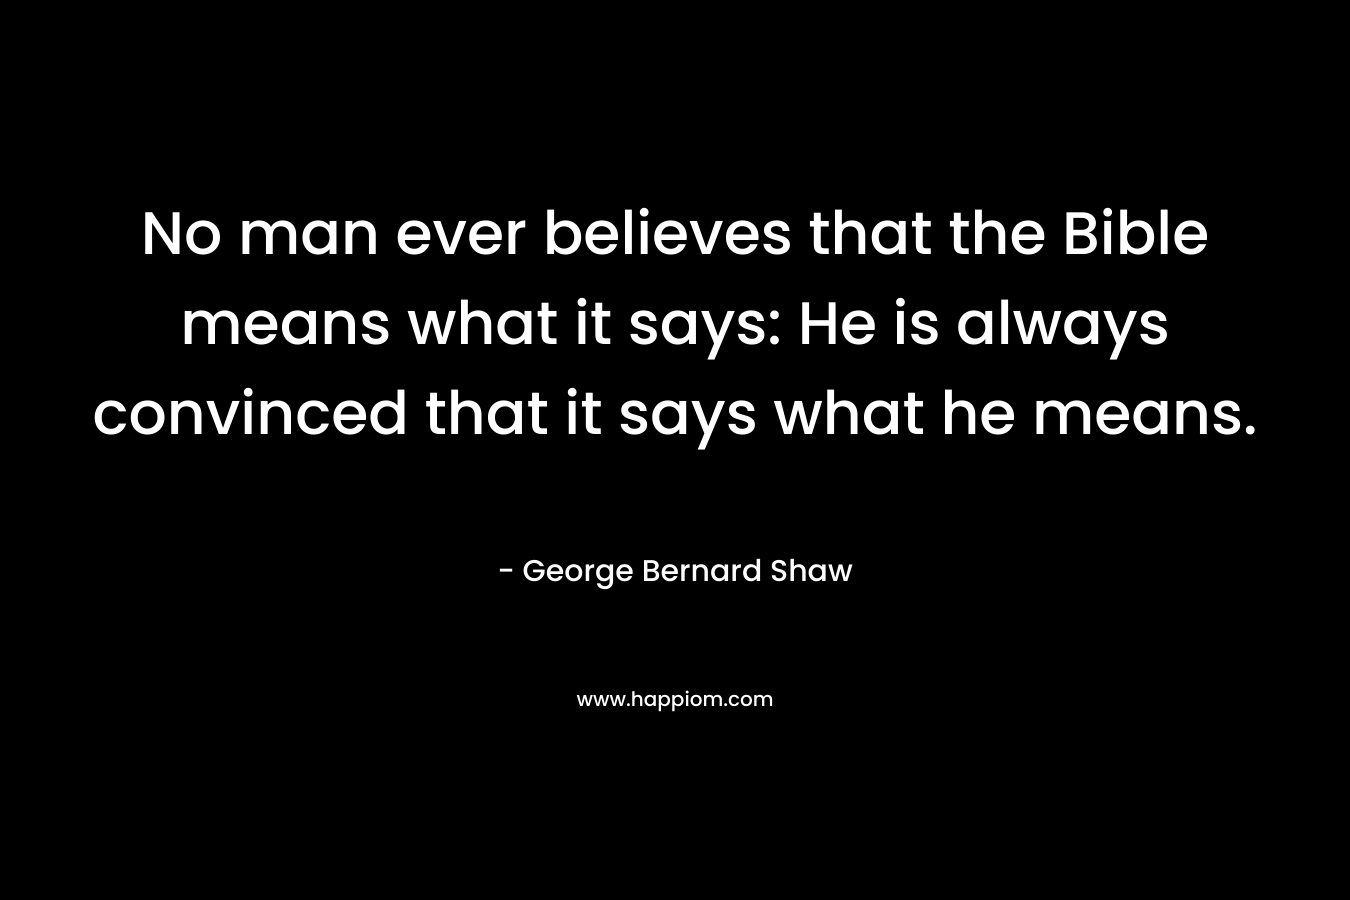 No man ever believes that the Bible means what it says: He is always convinced that it says what he means.